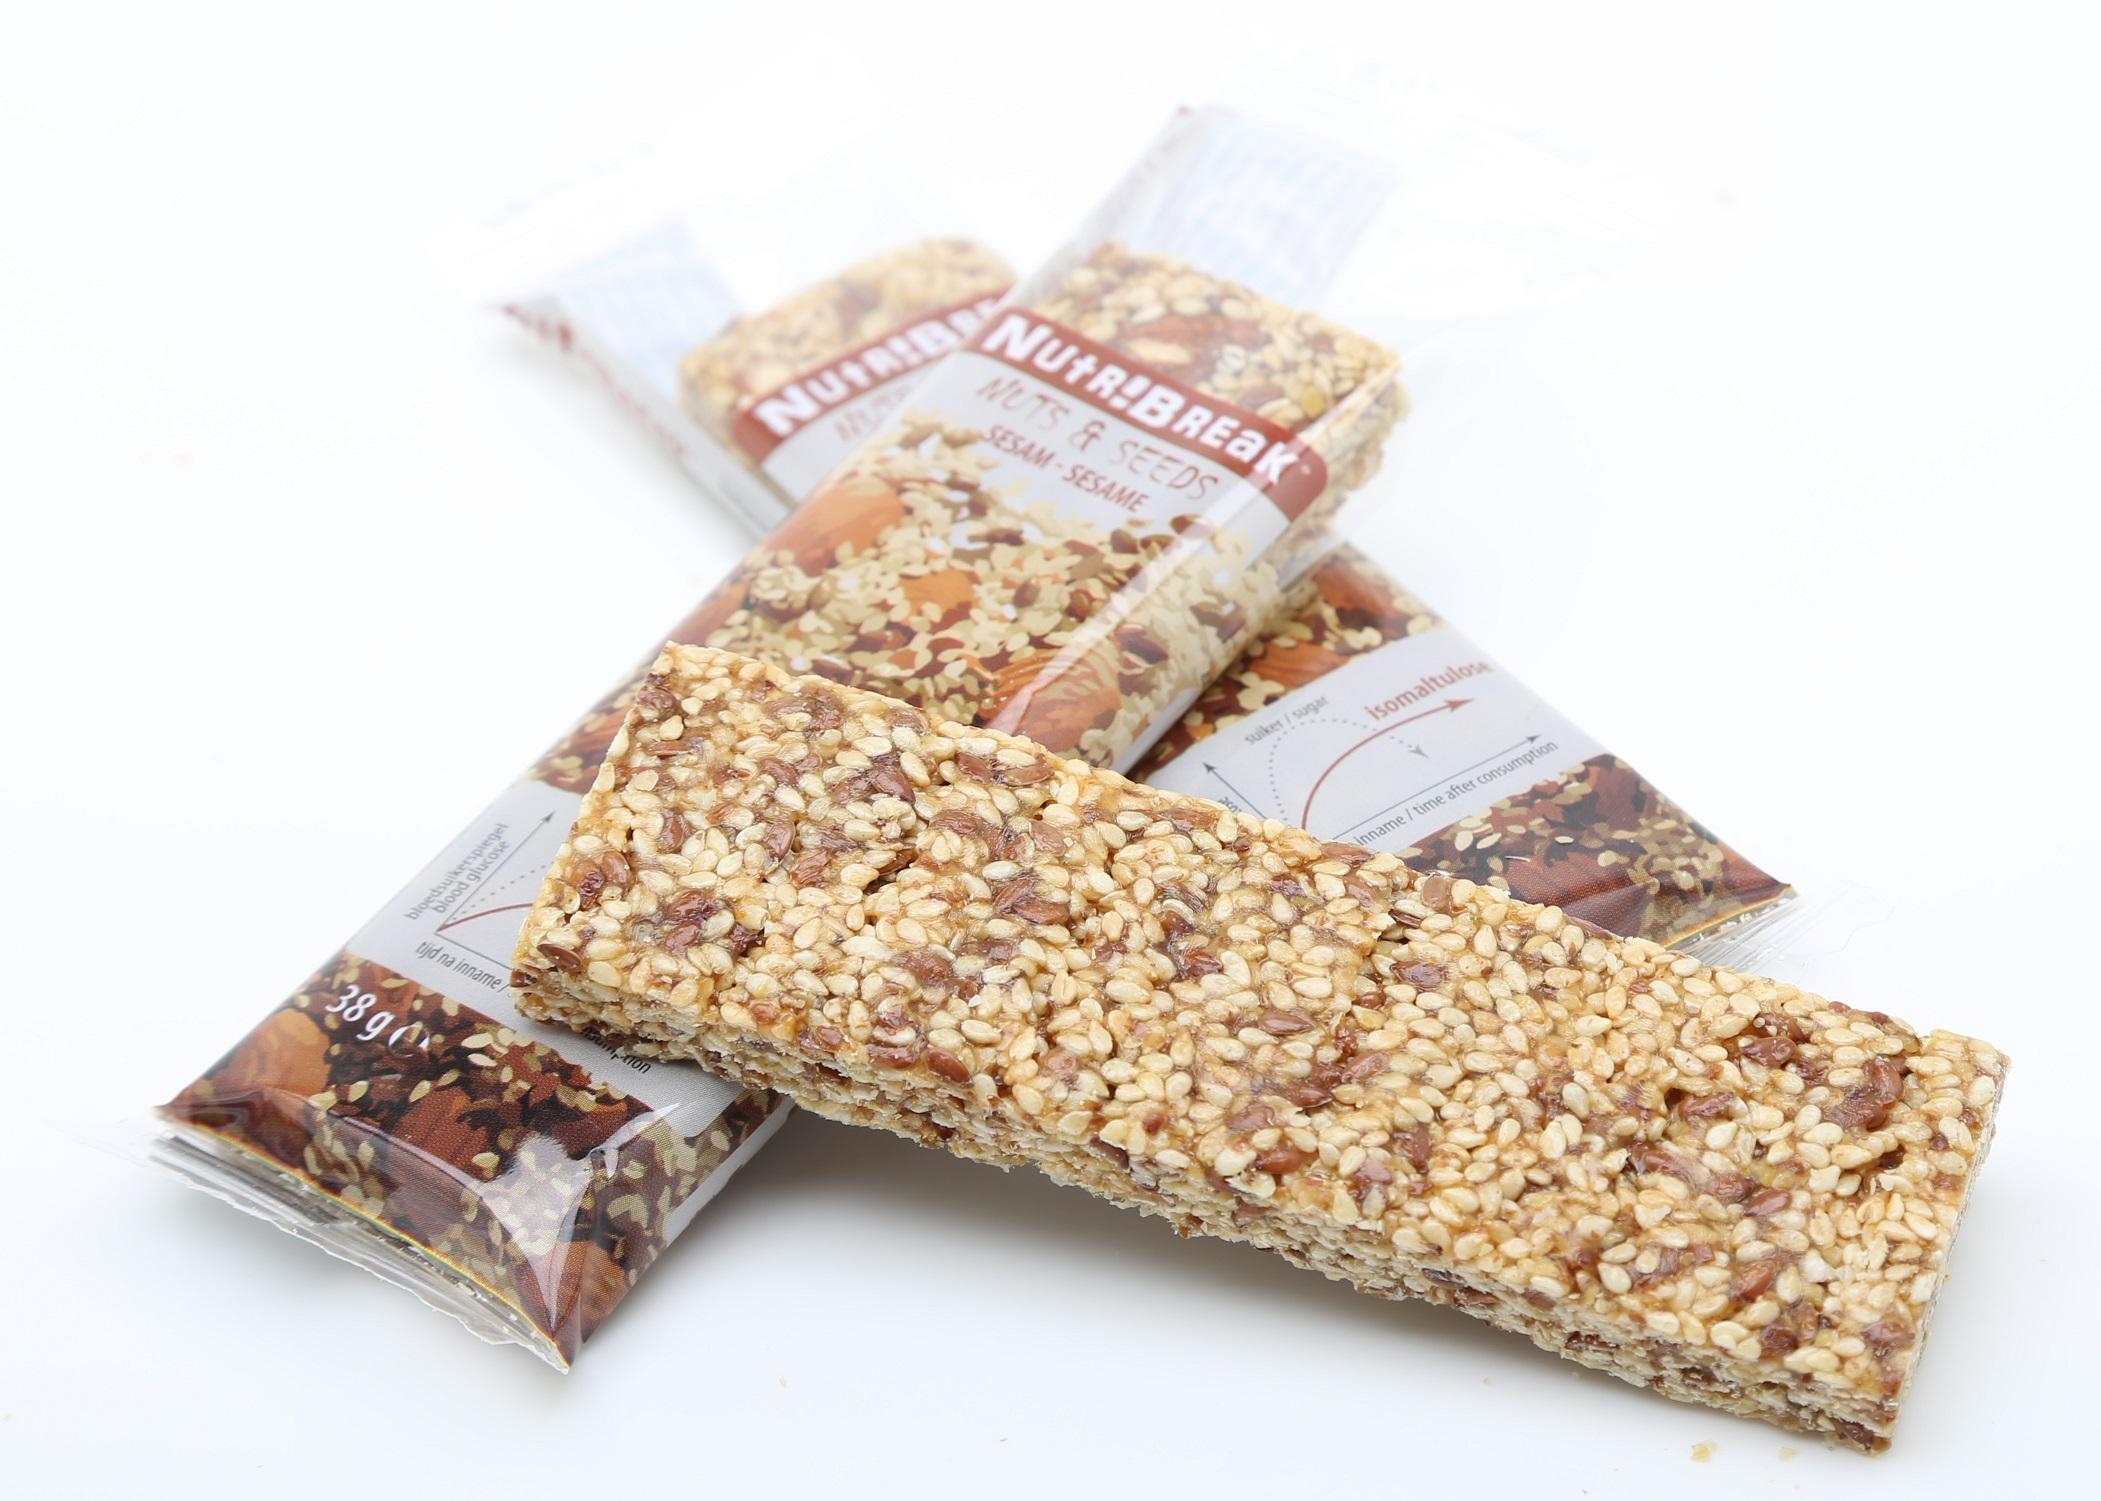 Bar composed of isomaltulose, sesame, almonds and flaxseed